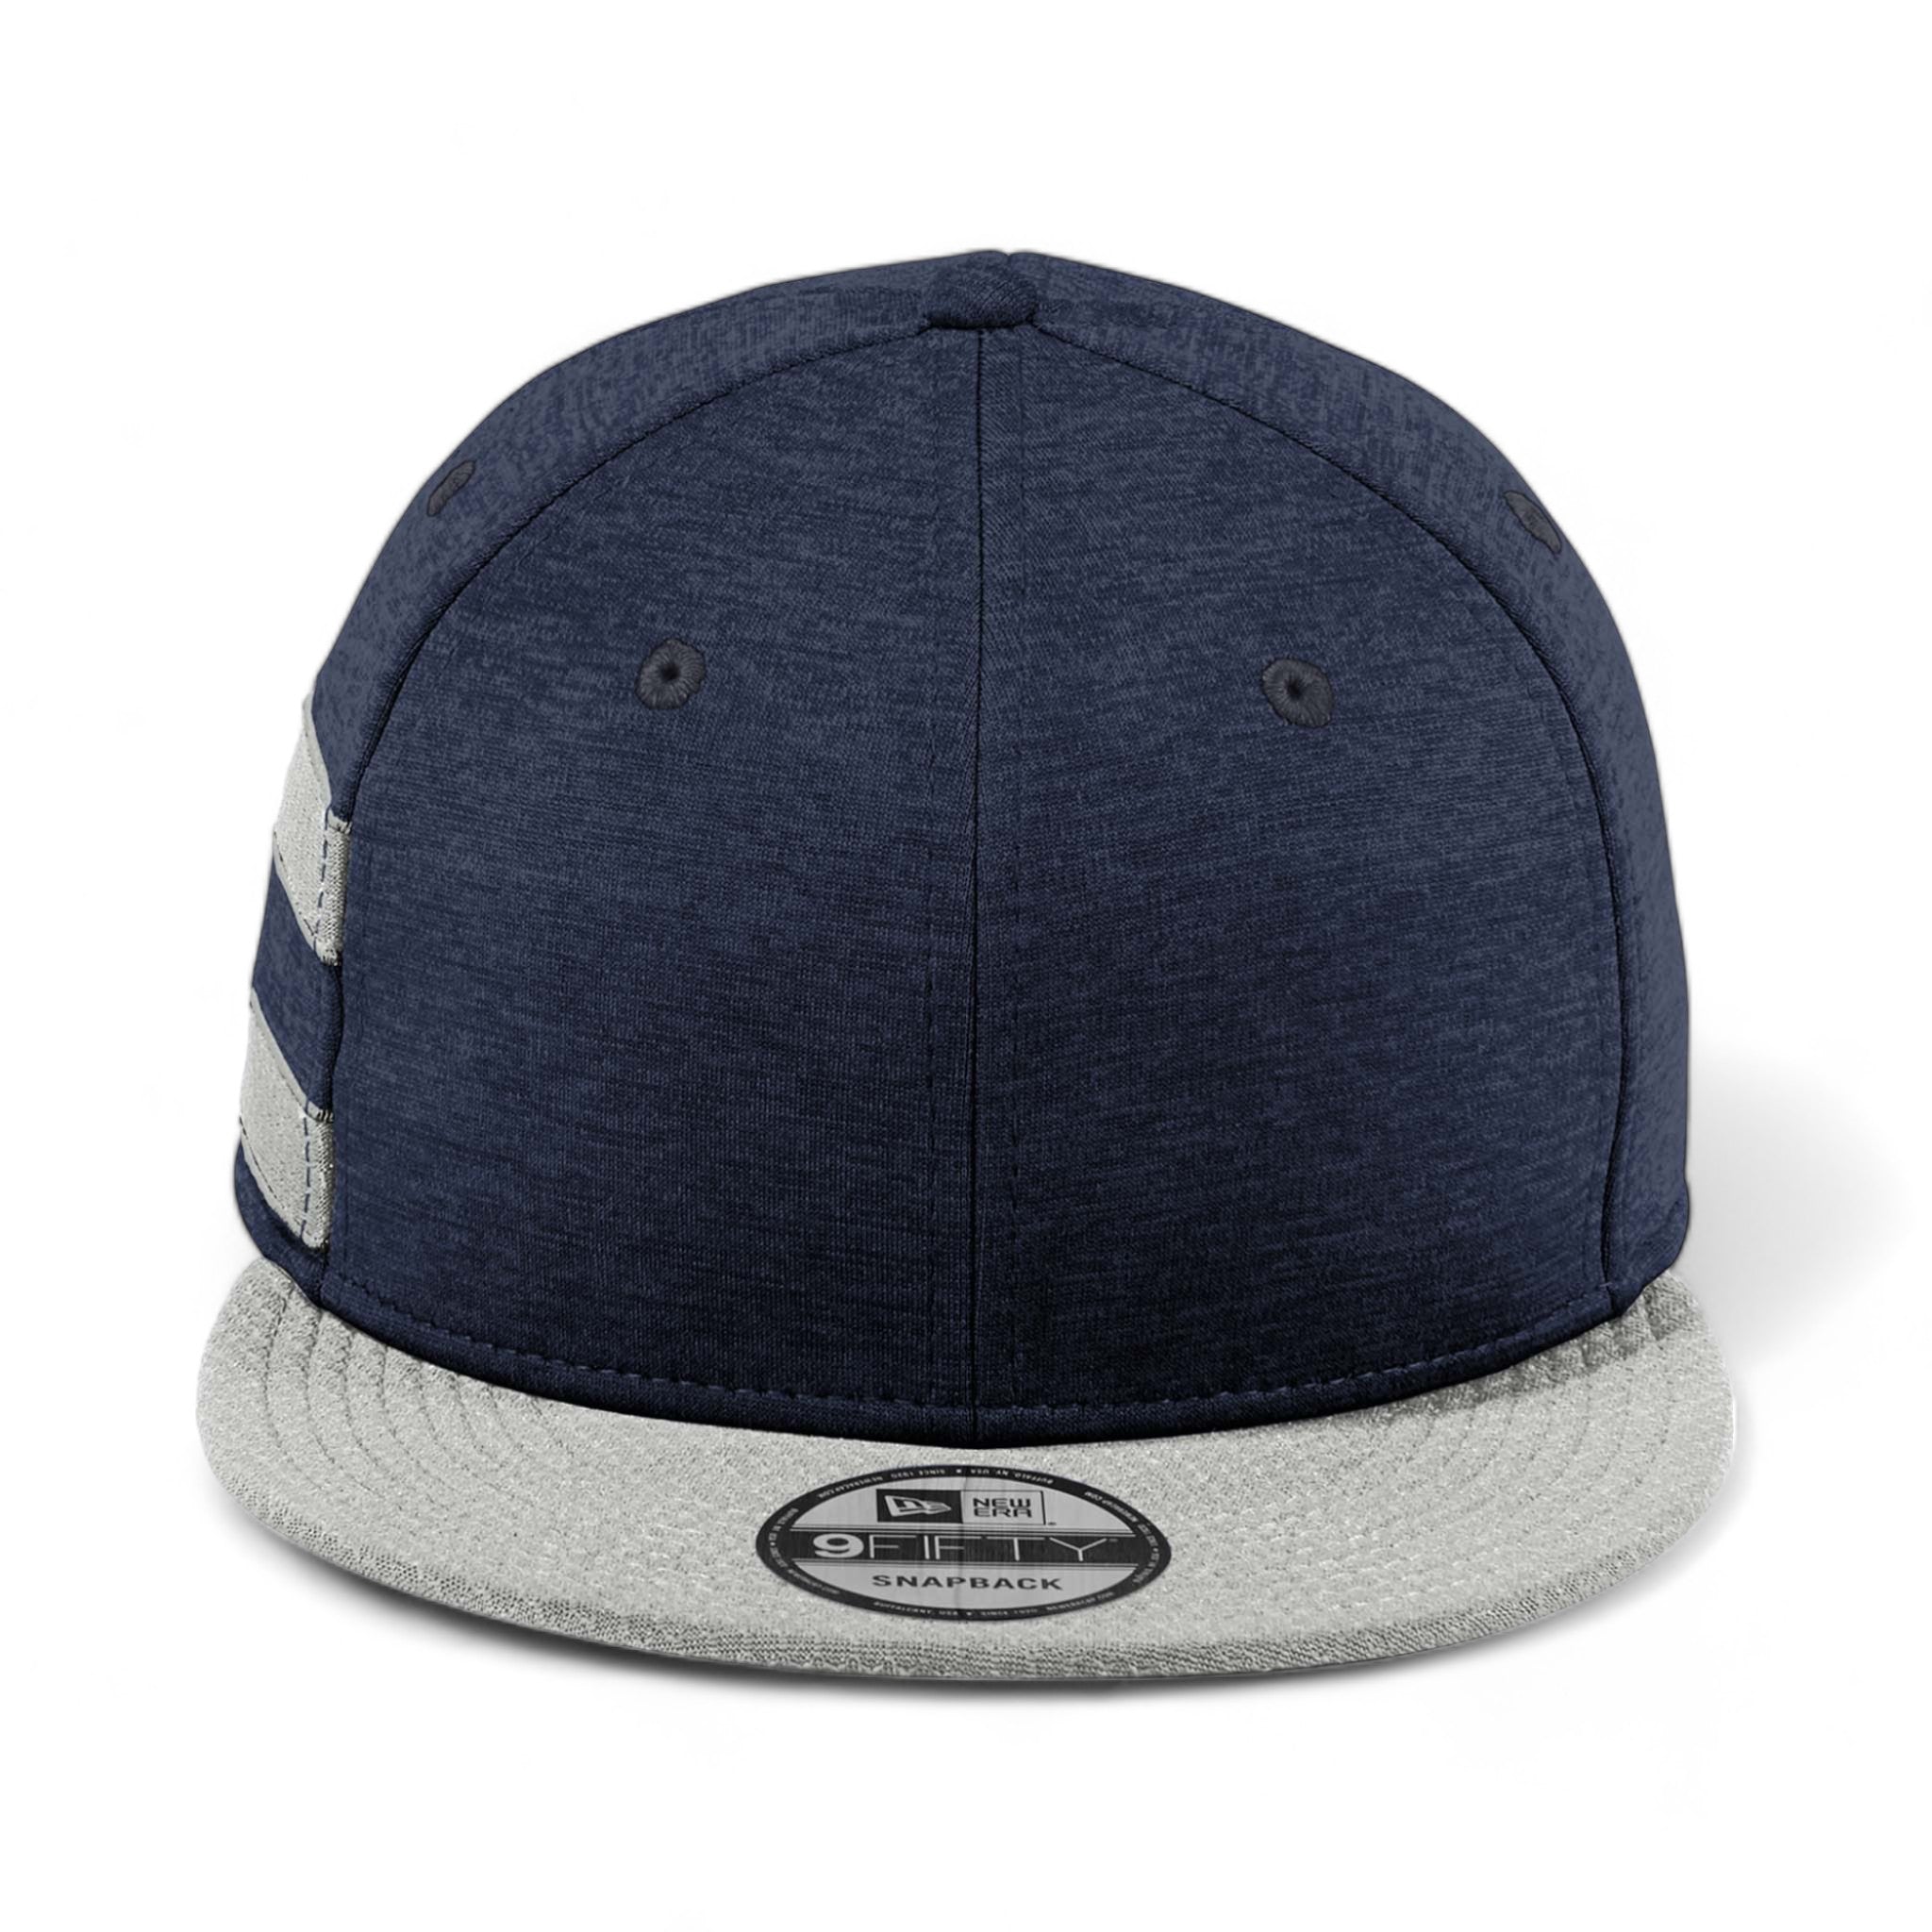 Front view of New Era NE408 custom hat in navy shadow heather and grey